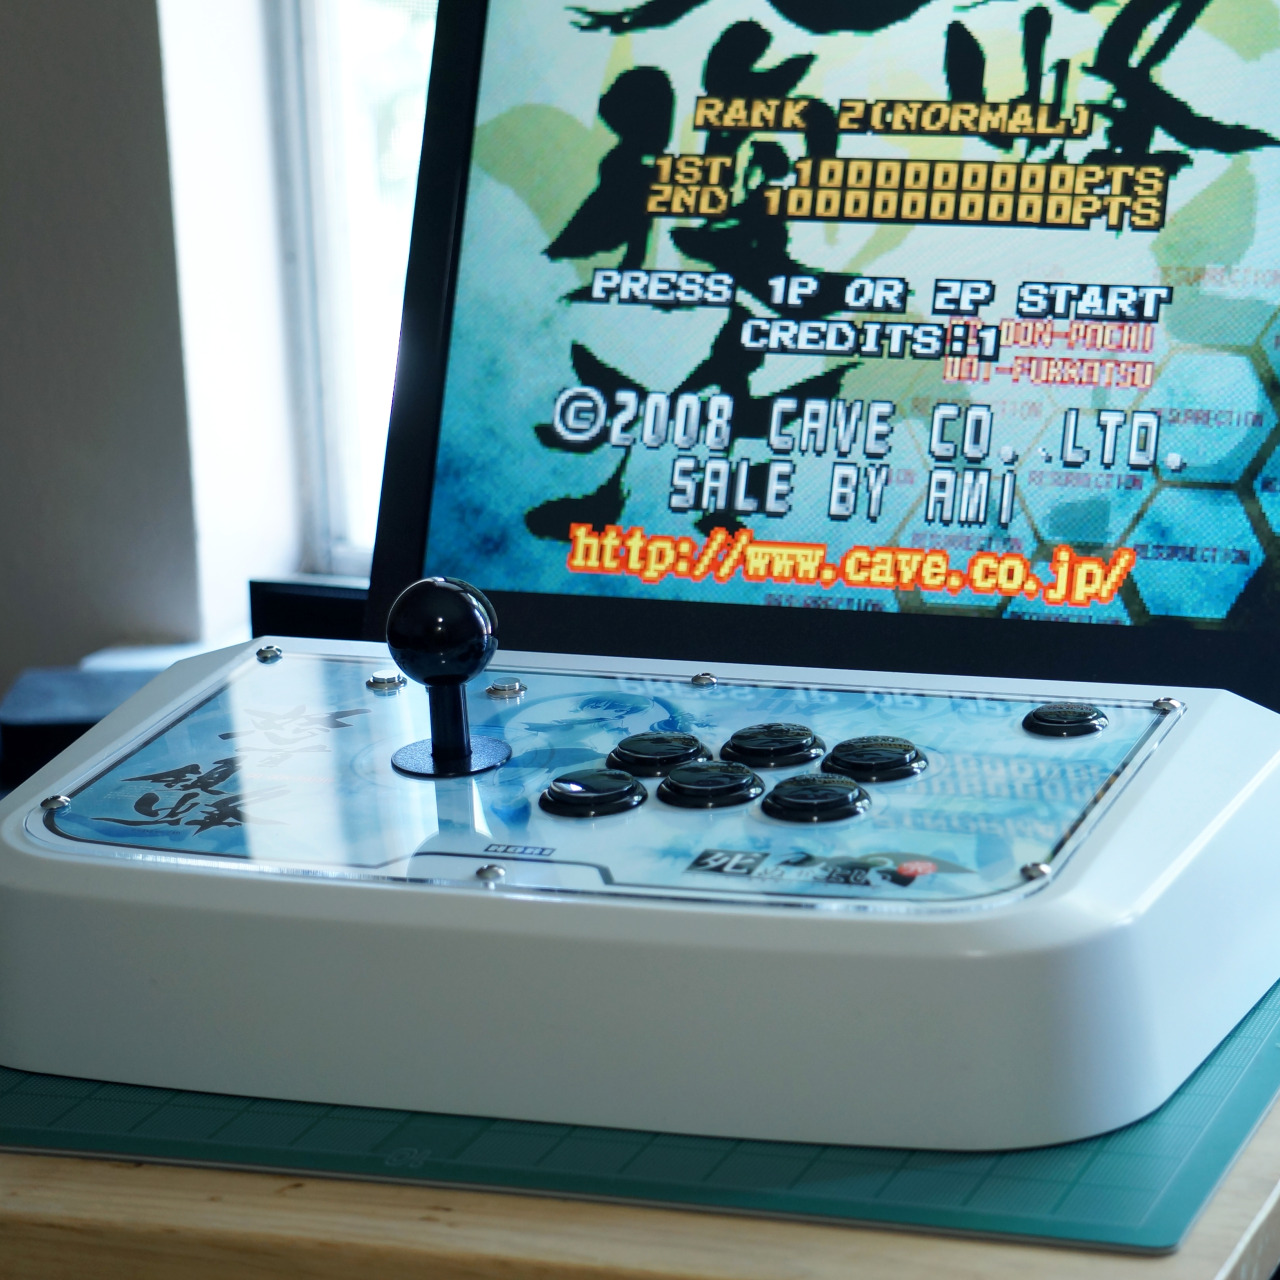 Shmup stick completion~ -SUZO 500 modified with Custom Shaft for Japanese Balltop and shaftcover by @arcadestatic (https://arcadestatic.wordpress.com/) and 25gf Omron microswitches
-12mm Anti-vandal...